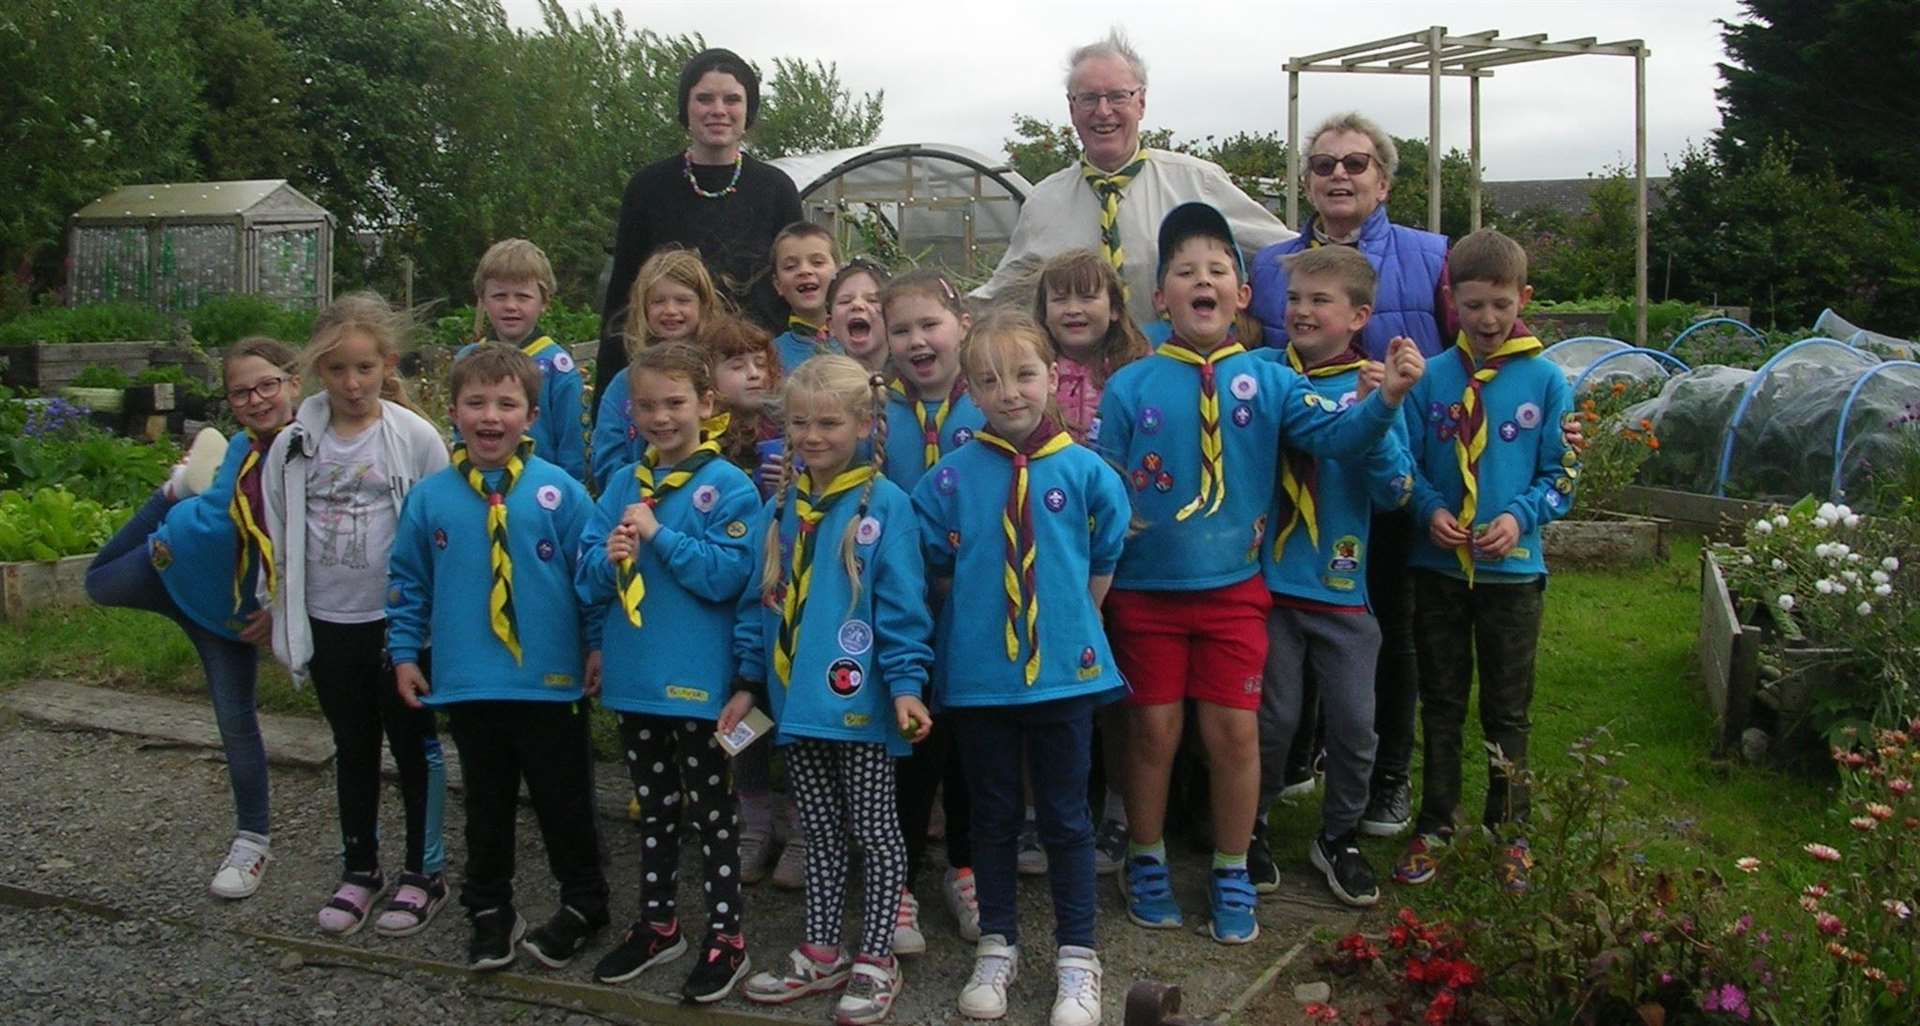 Beaver leaders Sandra Carson and Ian Pearson along with Sharon Dismore, garden manager, and the visiting Beaver Scout group.